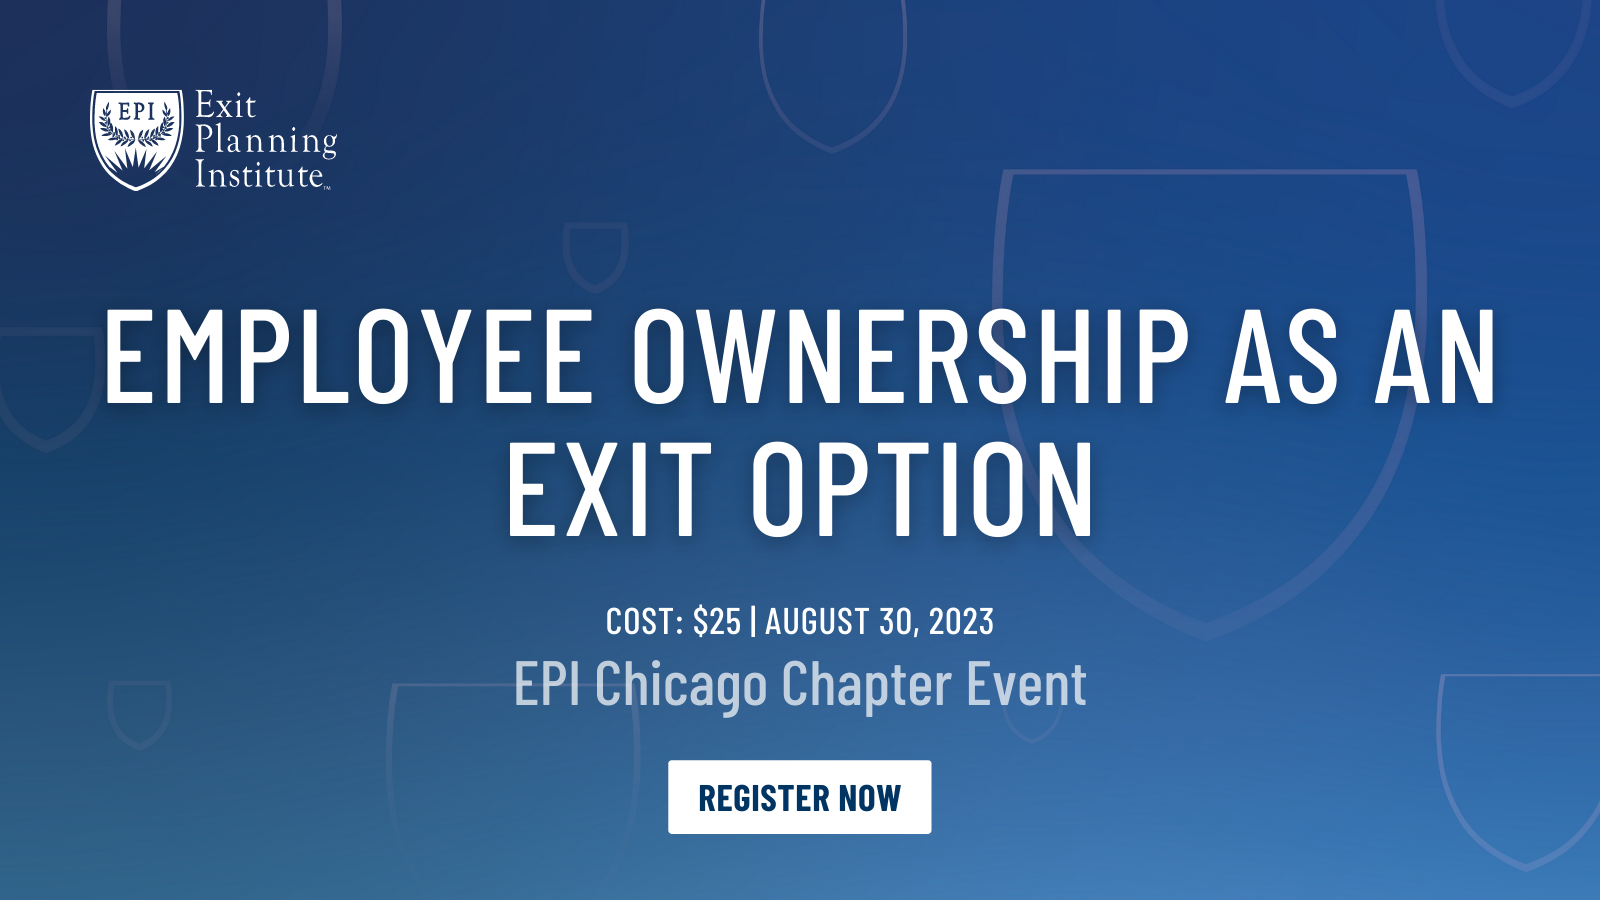 EPI Chicago Chapter Event | August 30, 2023 – Exit Planning Institute